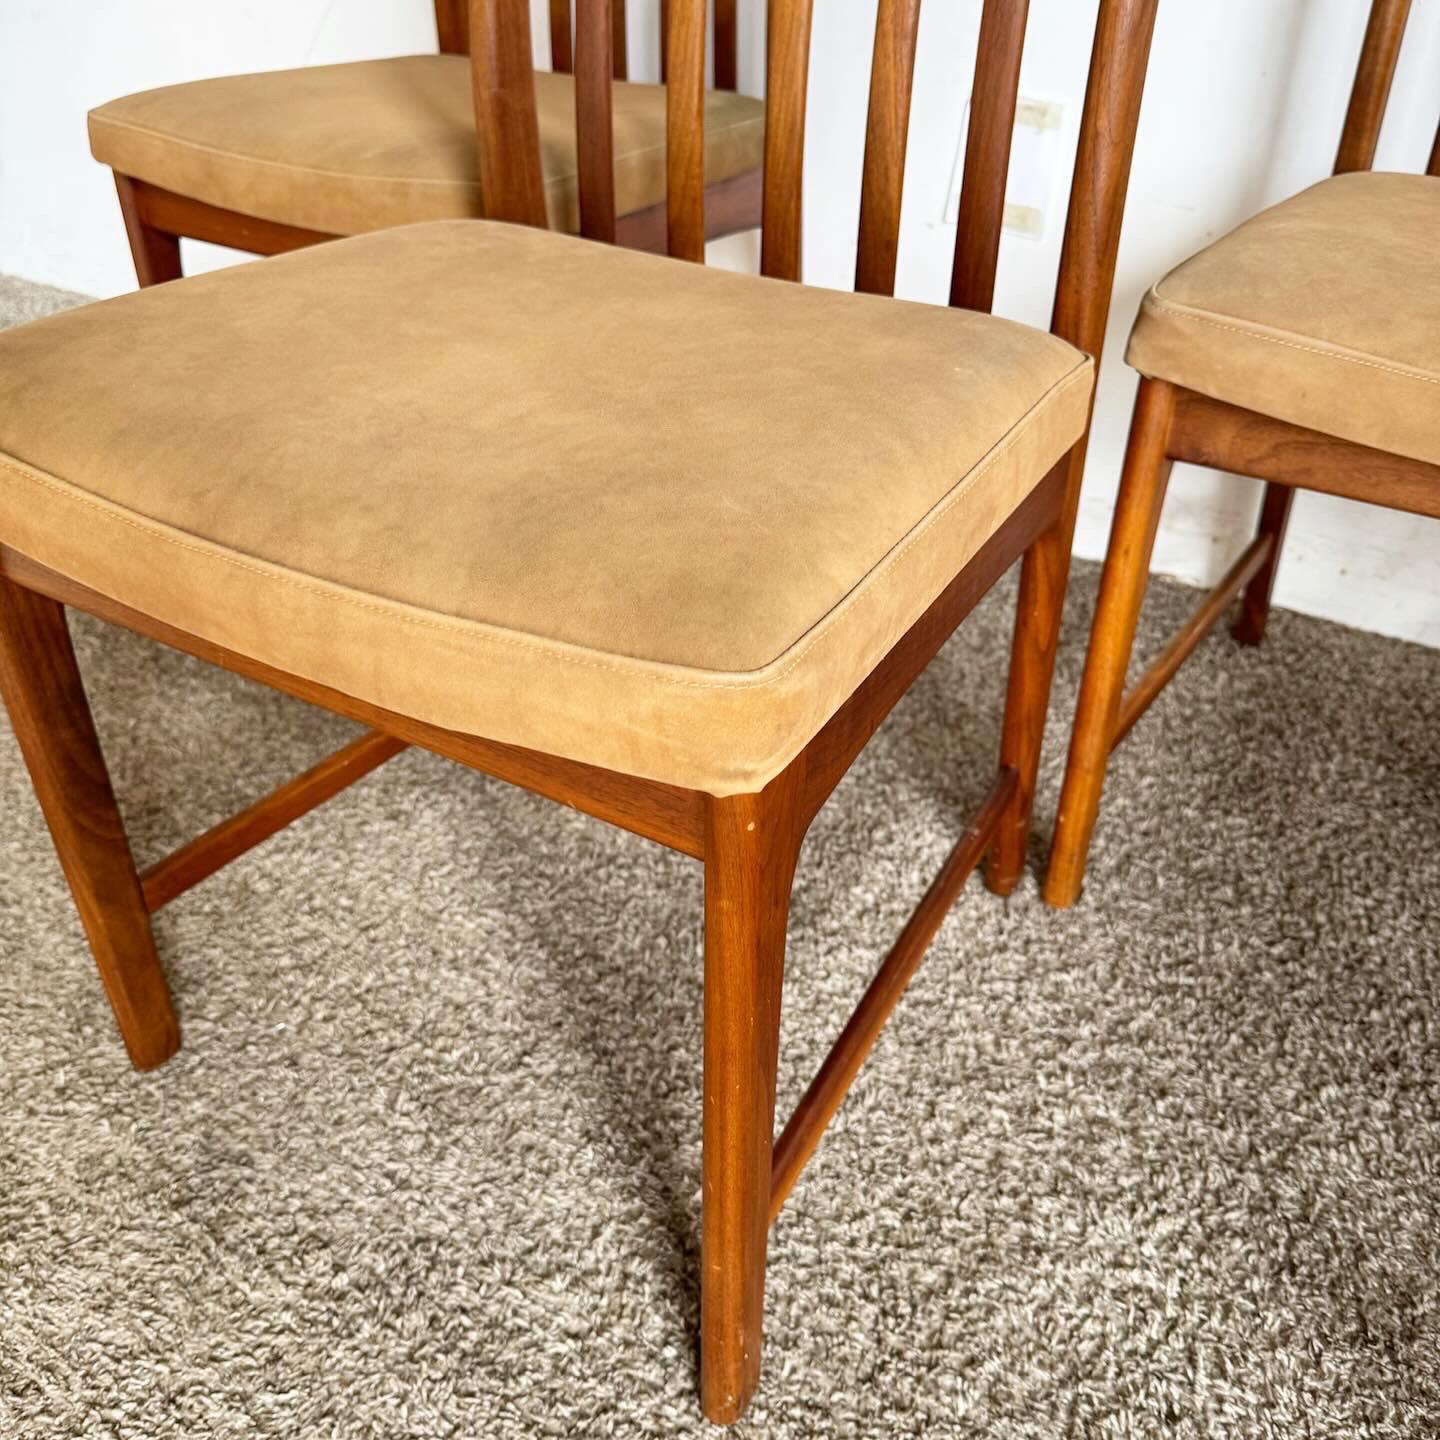 20th Century Vintage Scandinavian Modern Teak Dining Chairs by Folke Ohlsson for Dux Set of 6 For Sale